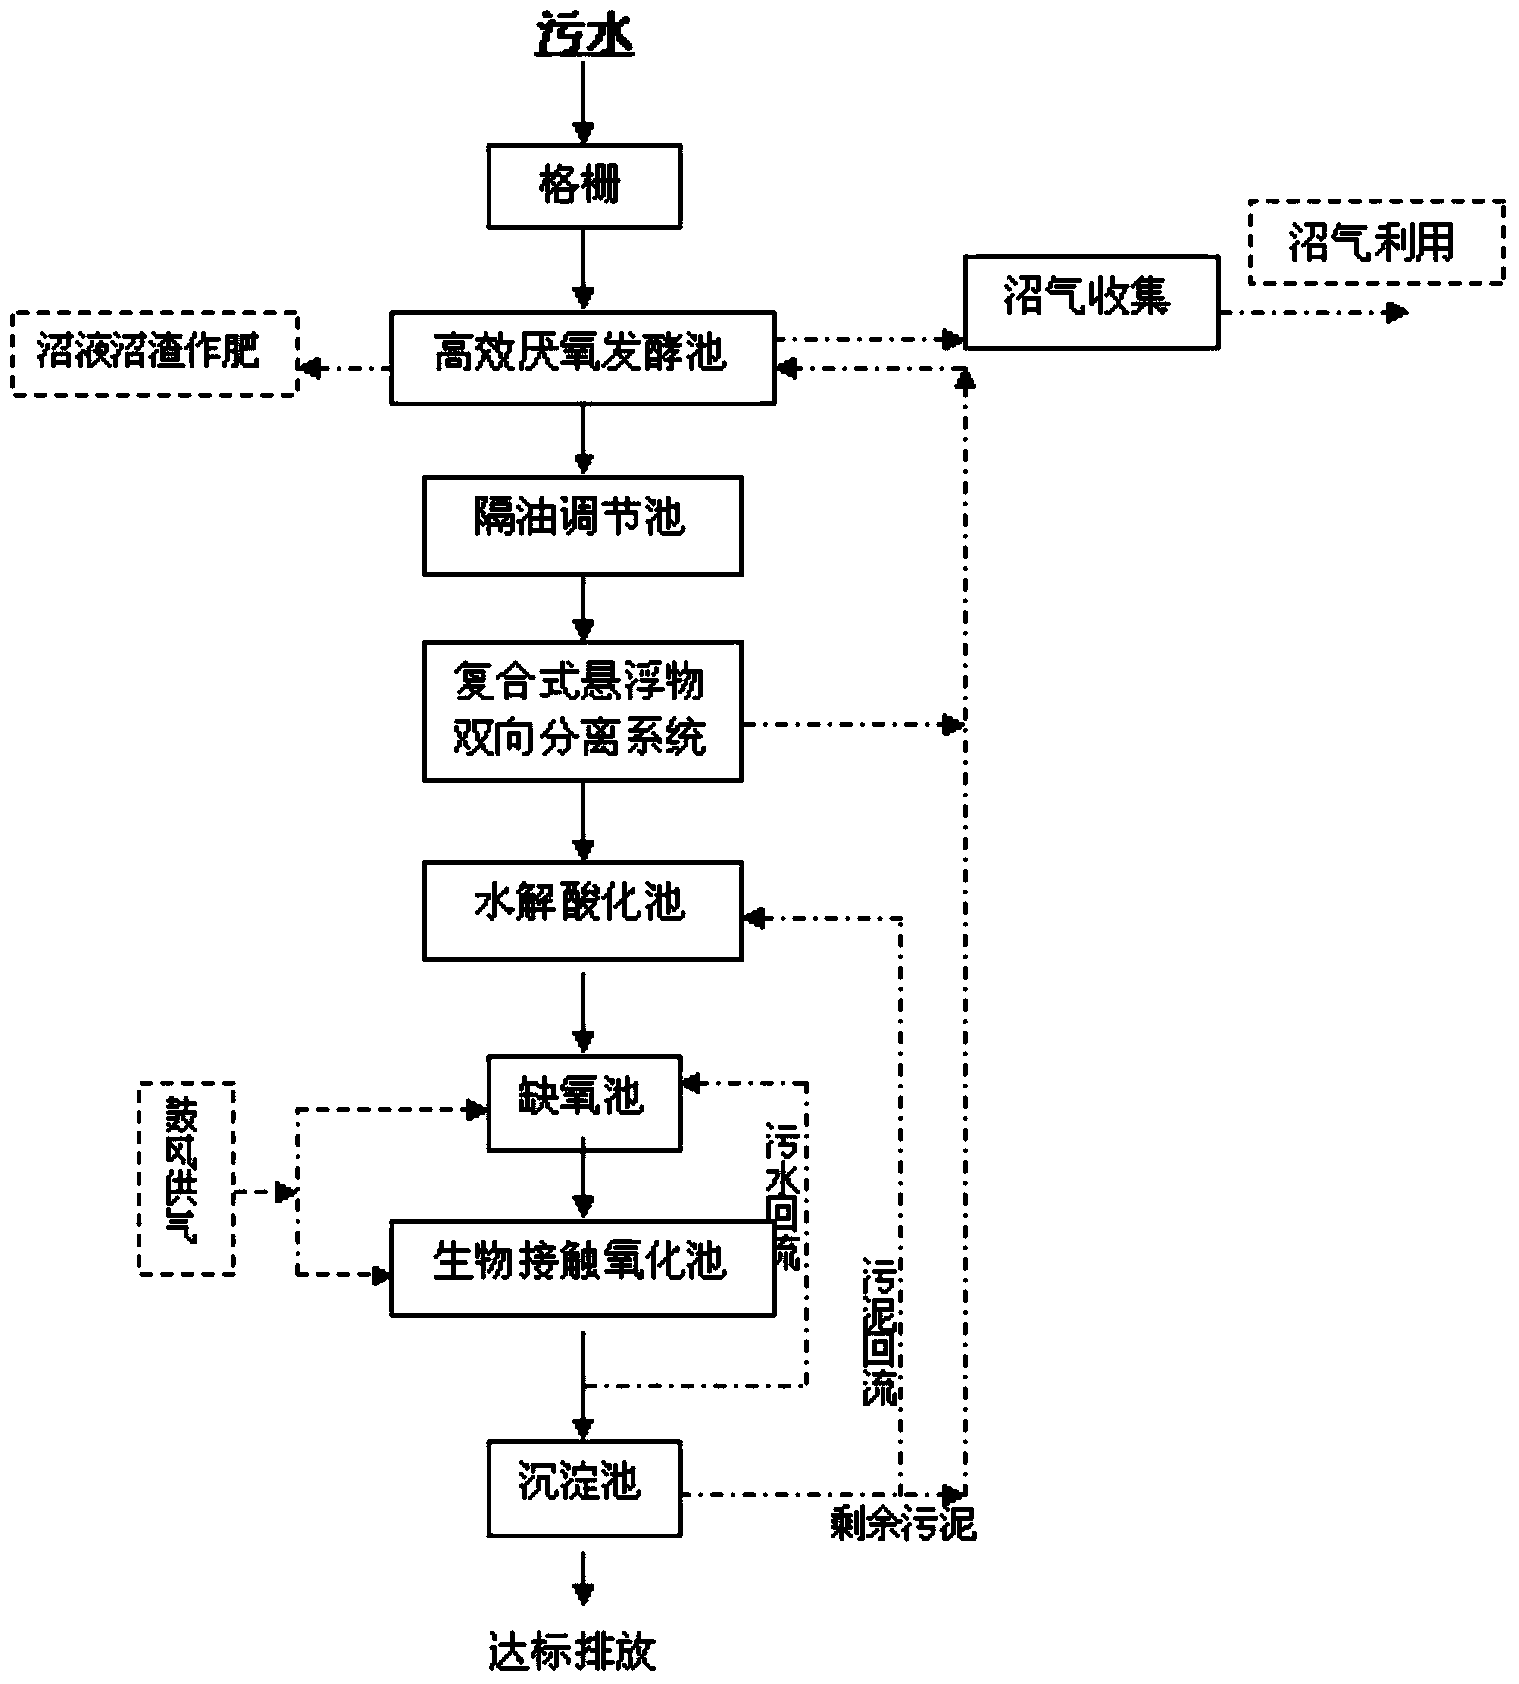 System for processing breeding and slaughtering sewage and technology for system